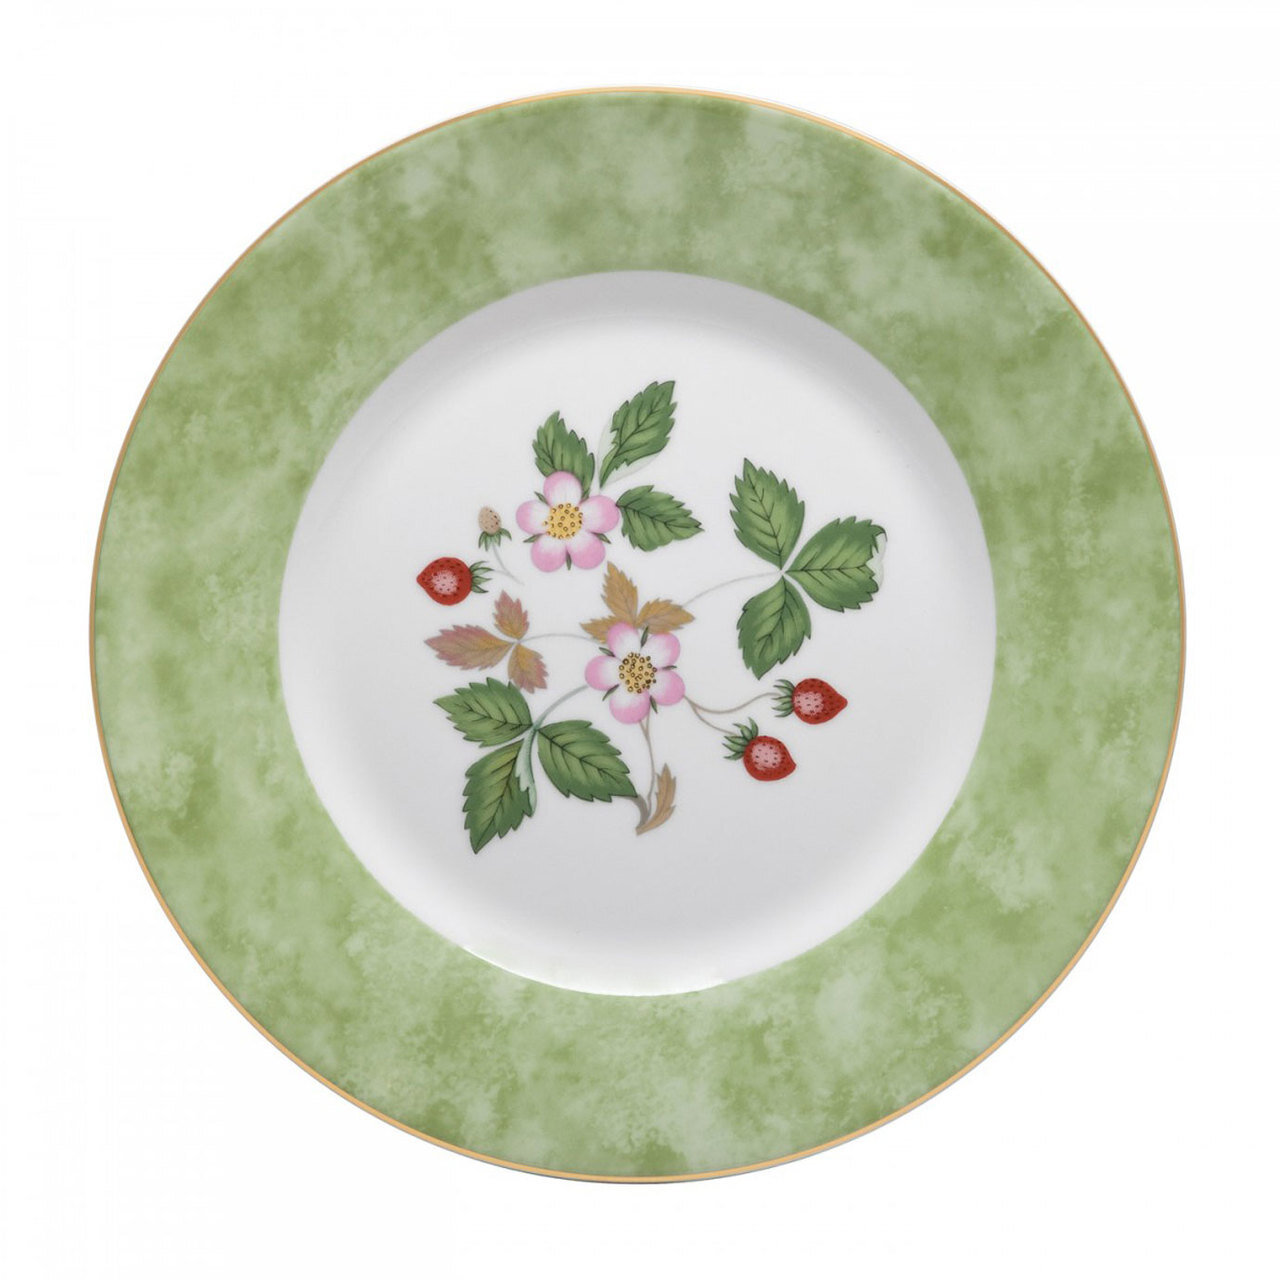 Wedgwood Wild Strawberry Accent Salad Plate 8 Inch